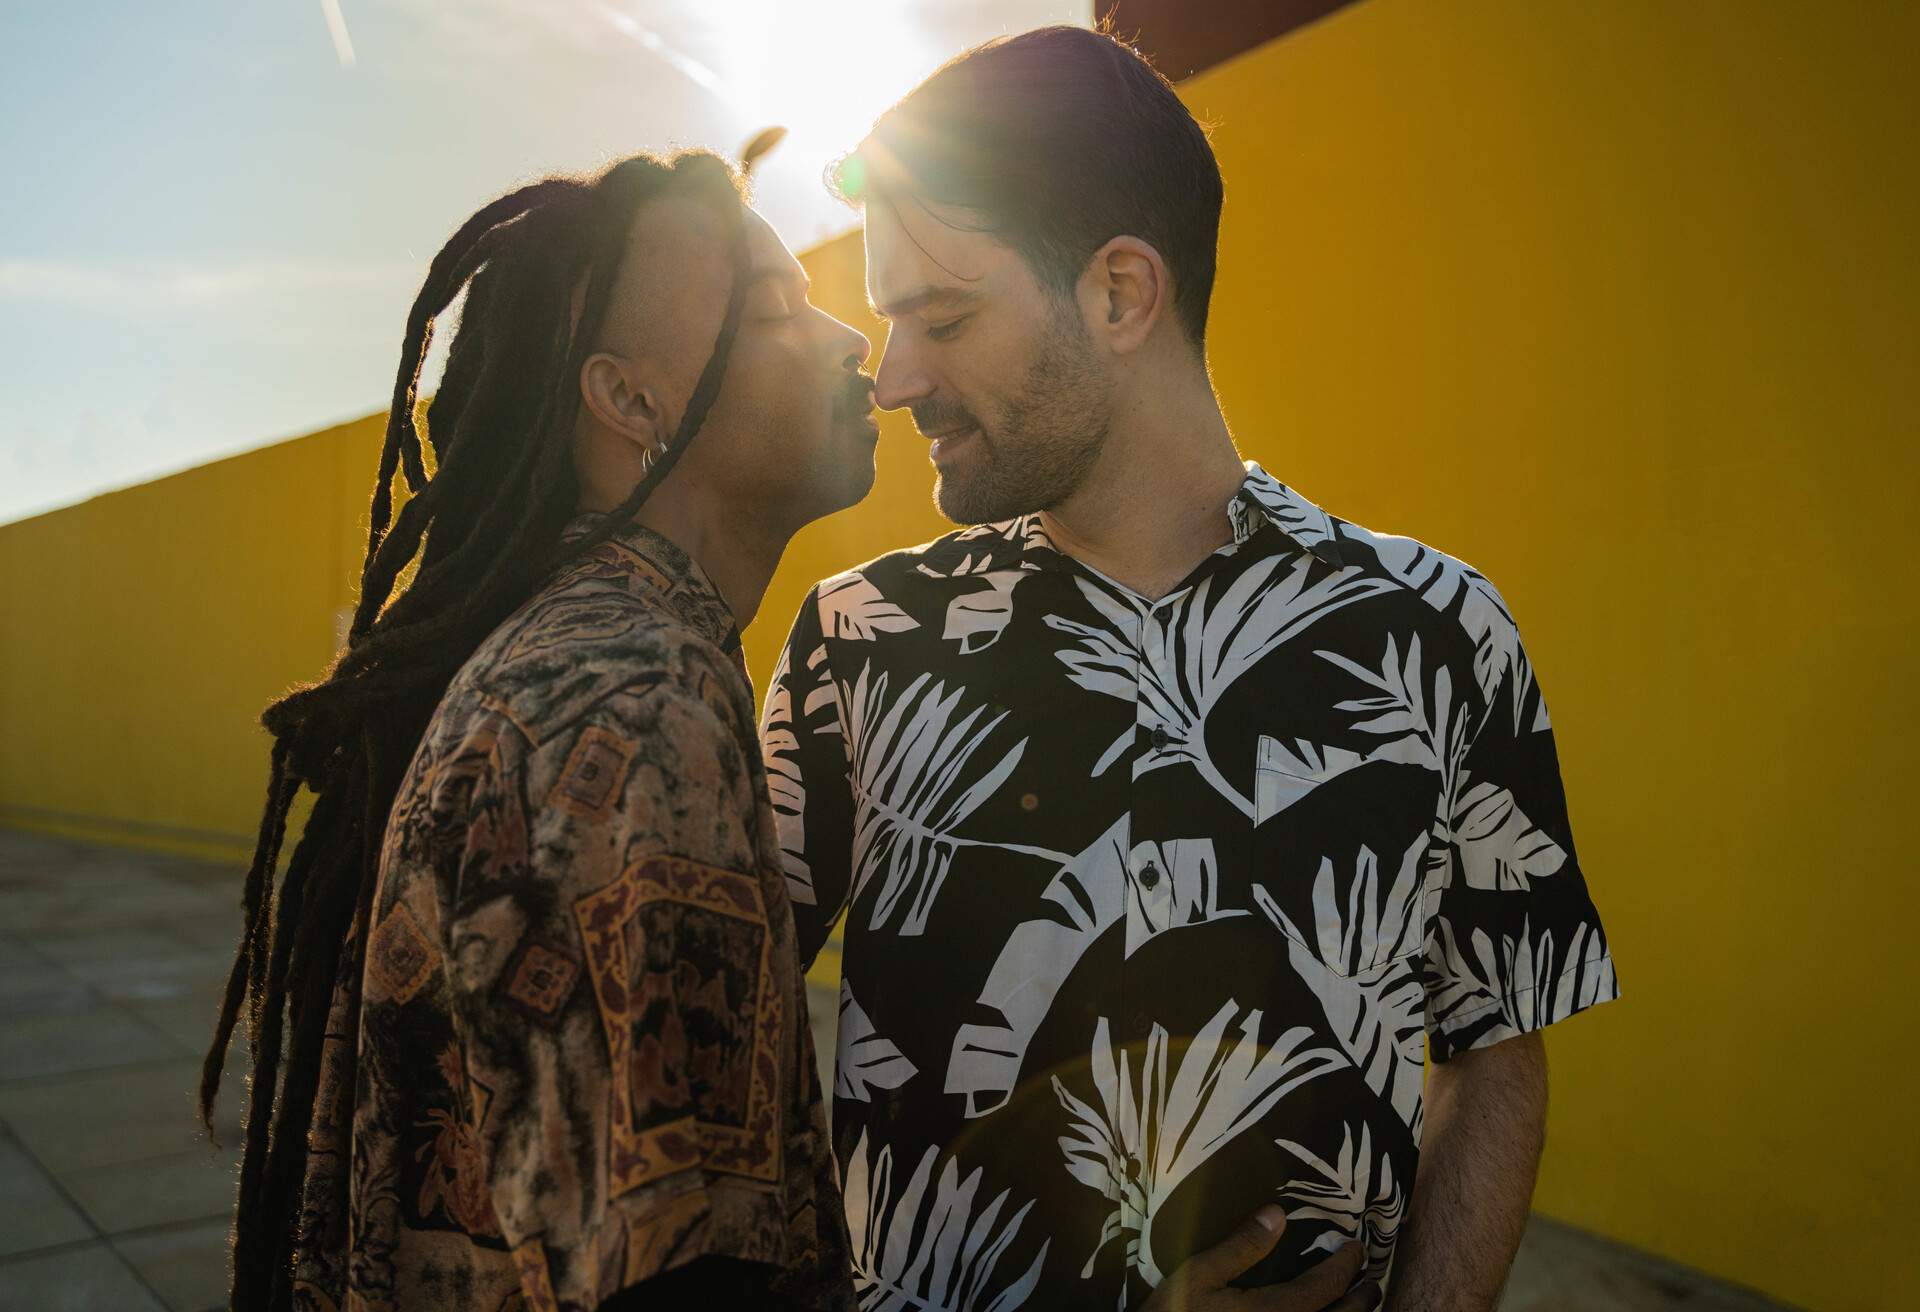 Young gay multiethnic couple looking at each other about to kiss, dressed in flower shirt and are in the city on a yellow background.